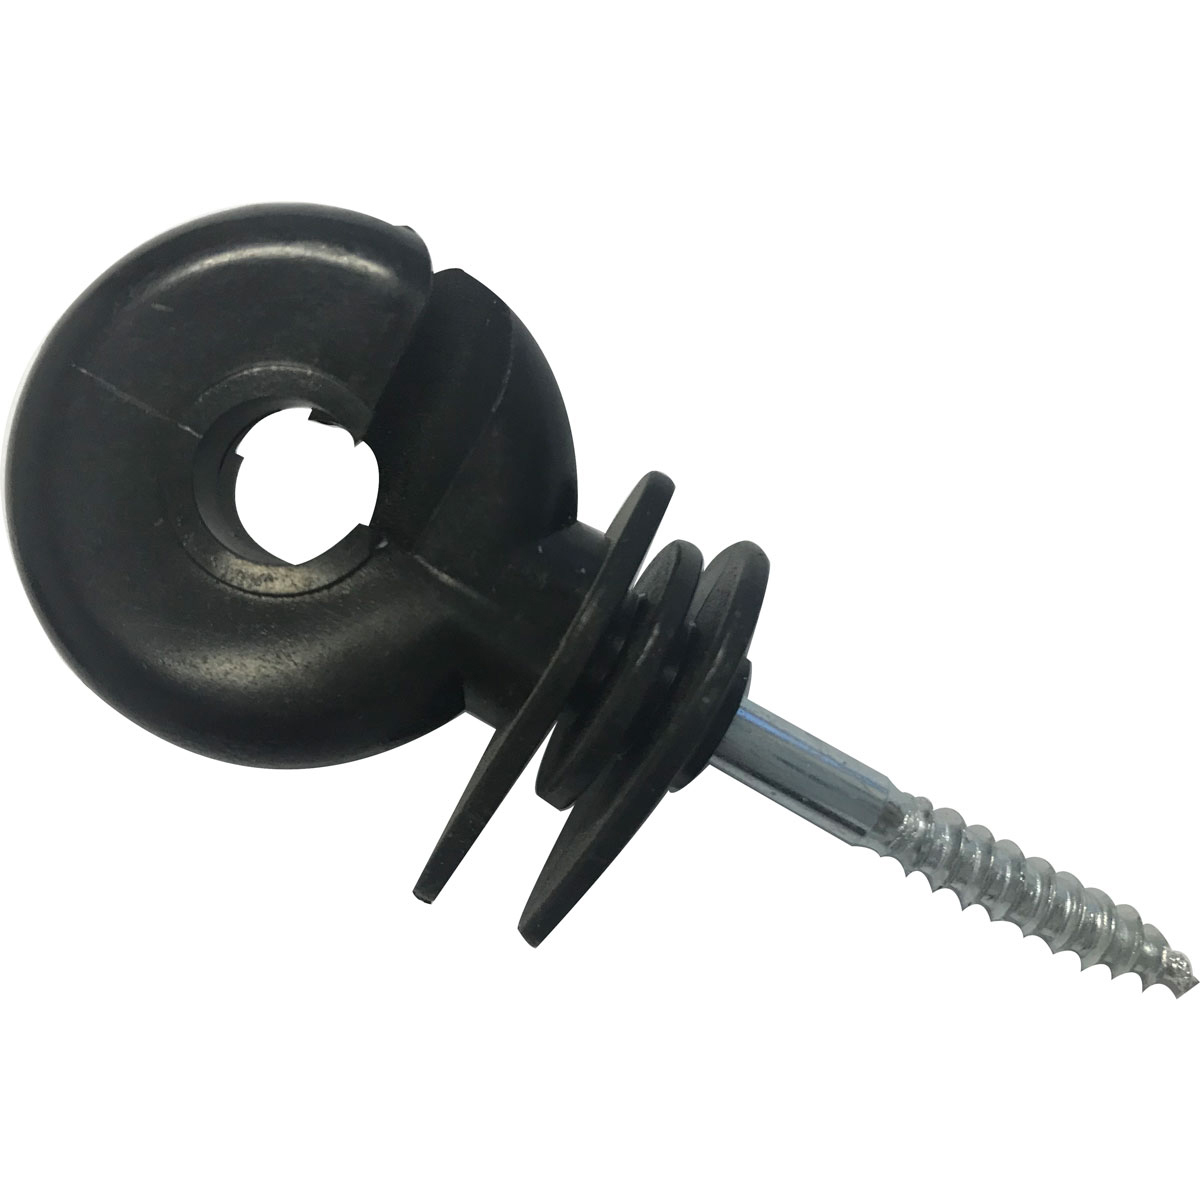 Electric Fencing Fence Screw In Poly Clips 40mm 20mm TAPE INSULATORS x 100 